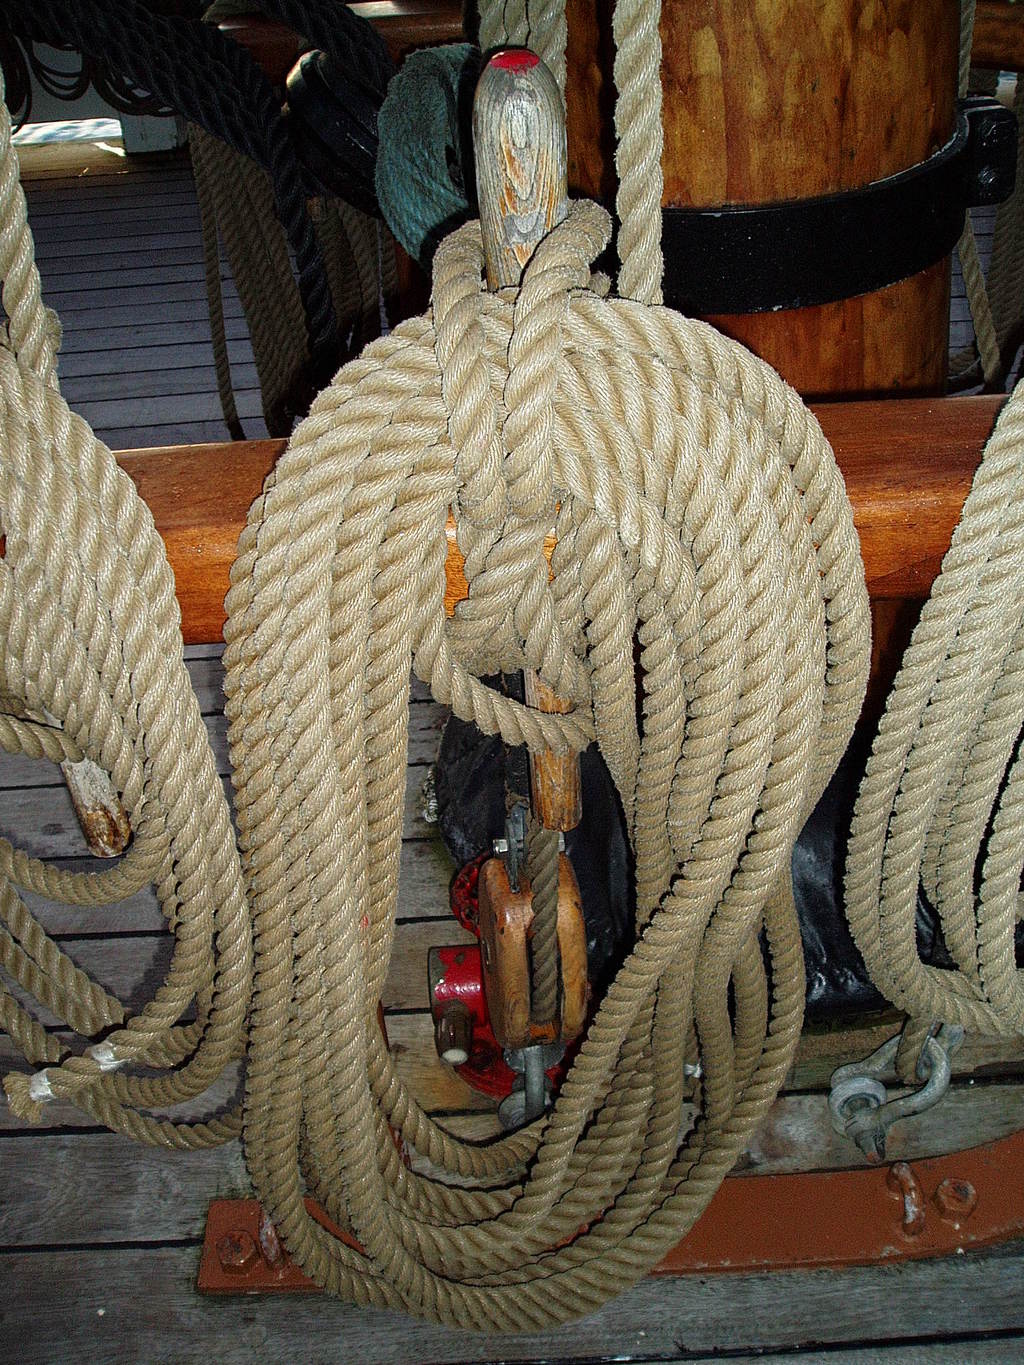 Rope coiled around a pin by the mast.